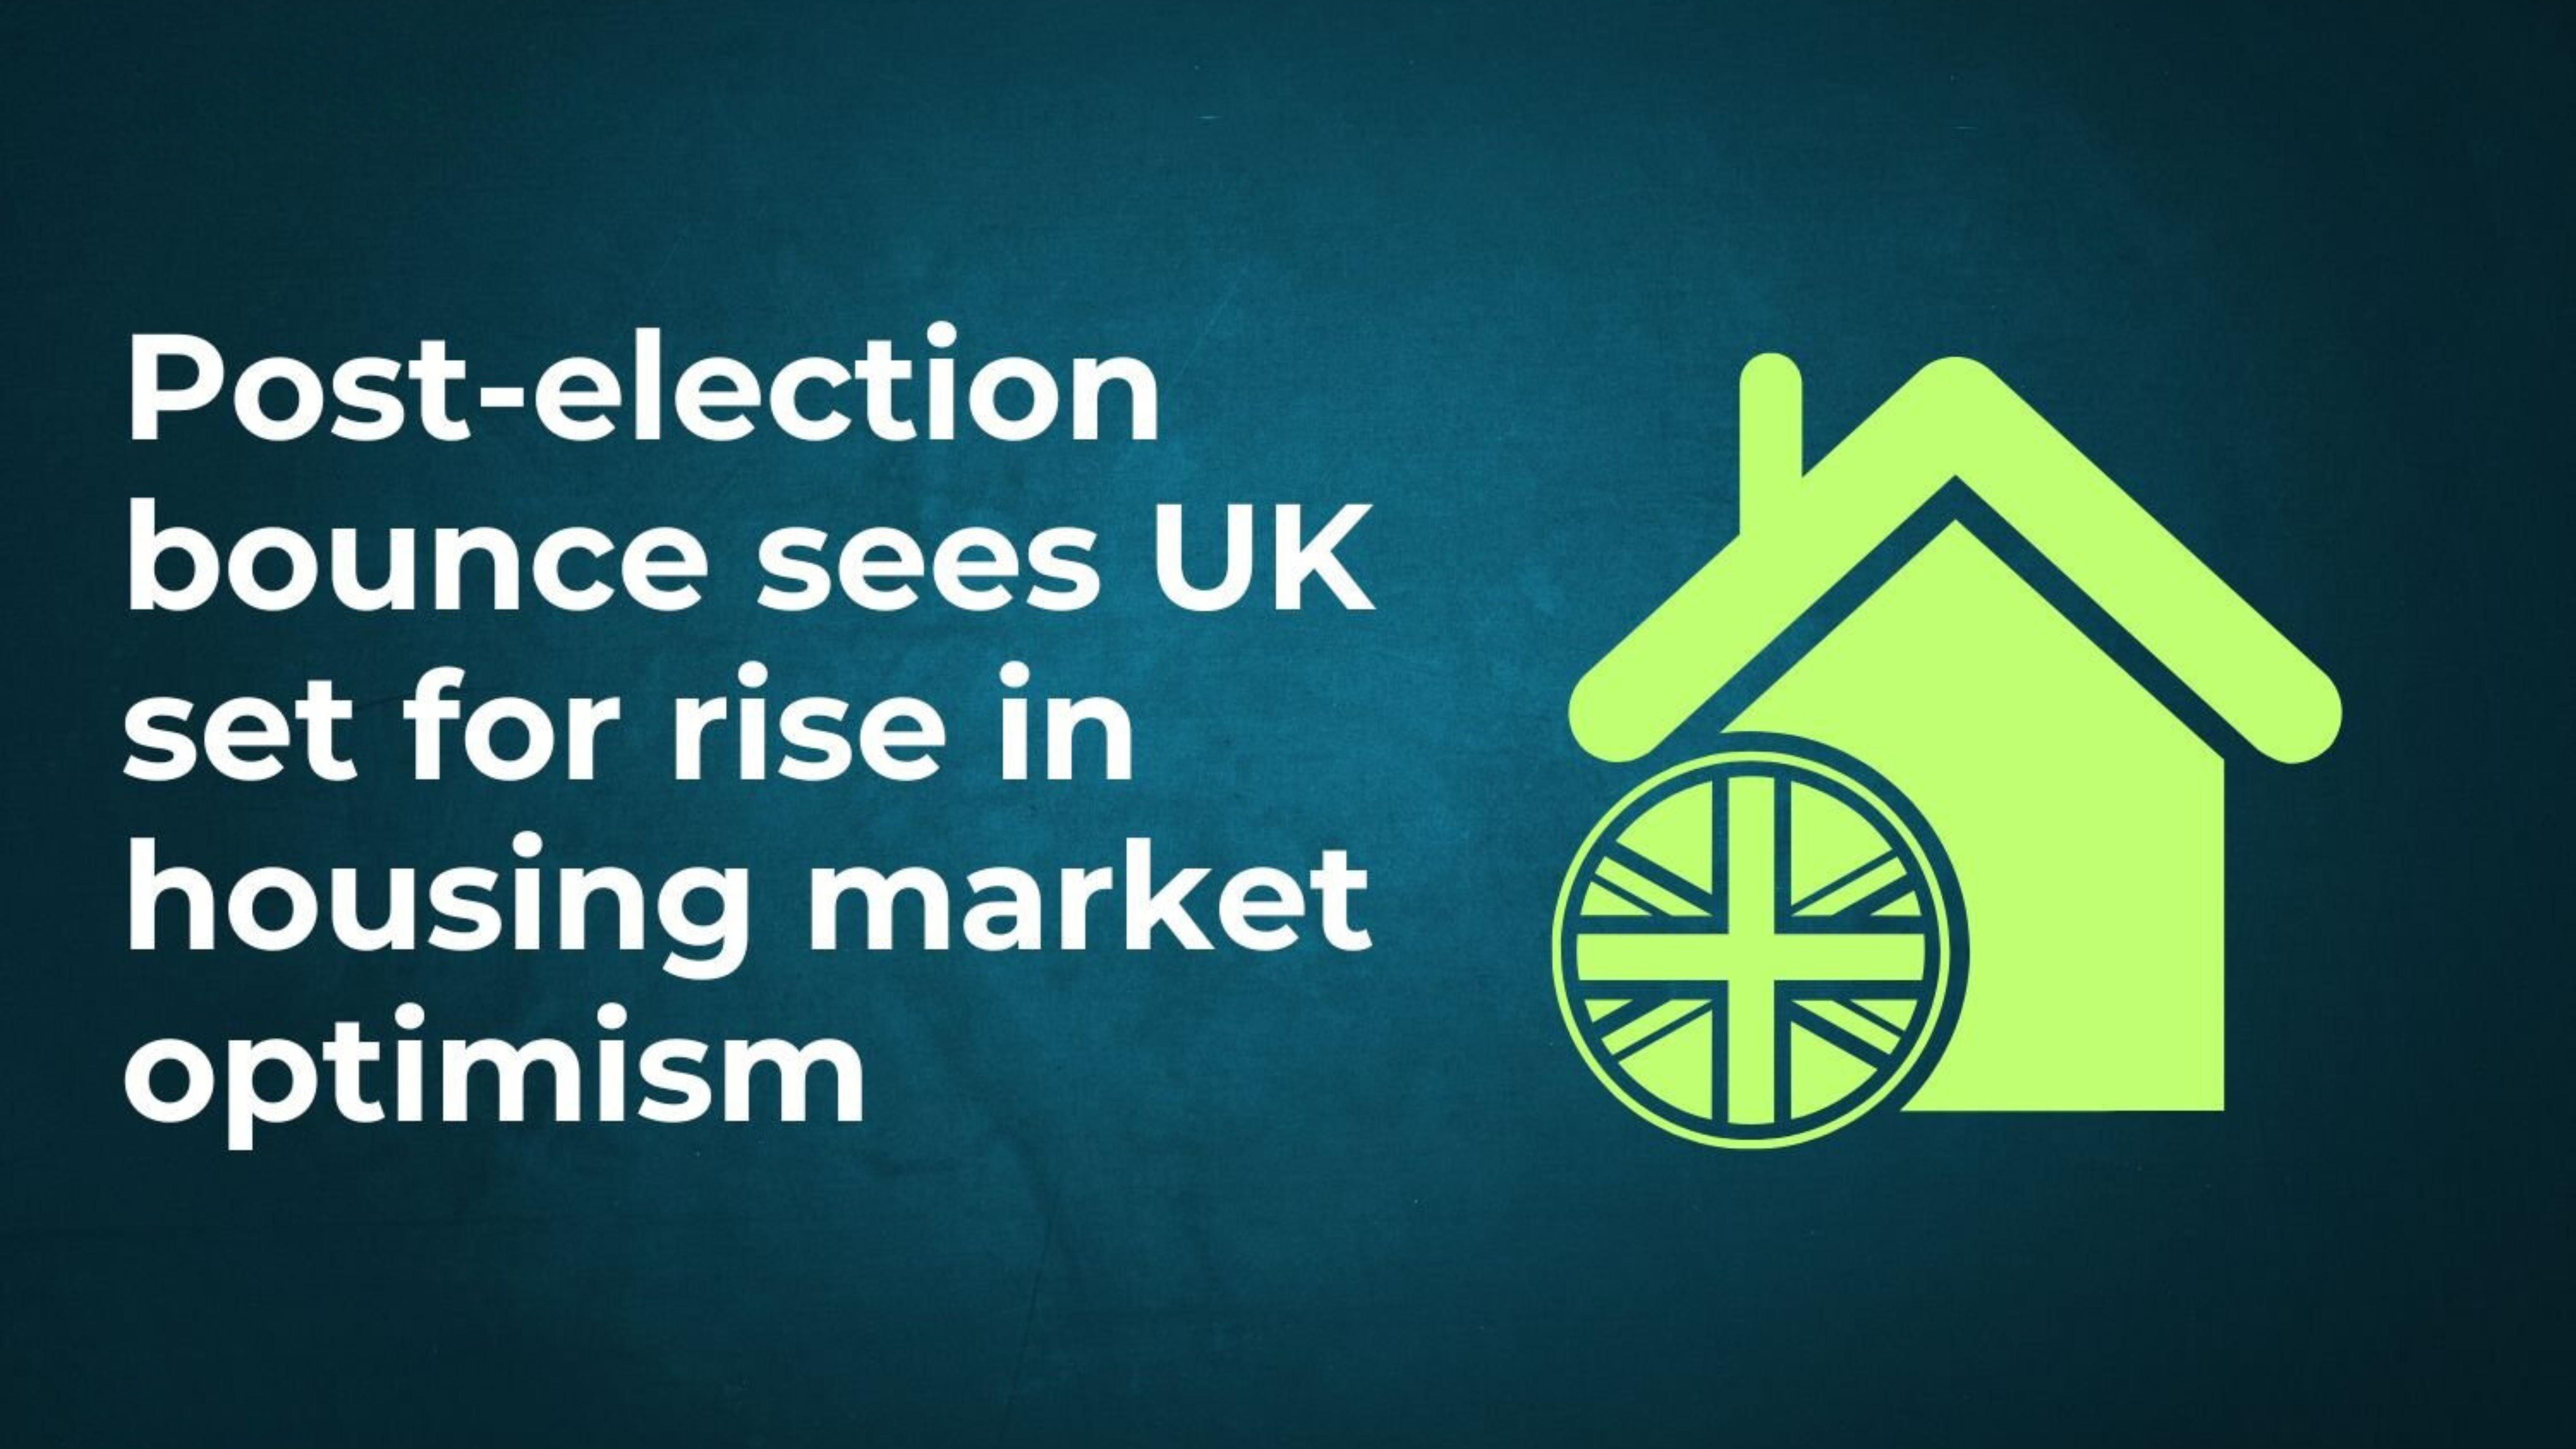 FORECASTING A PROMISING AUTUMN: FACTORS DRIVING OPTIMISM IN HOUSING MARKET